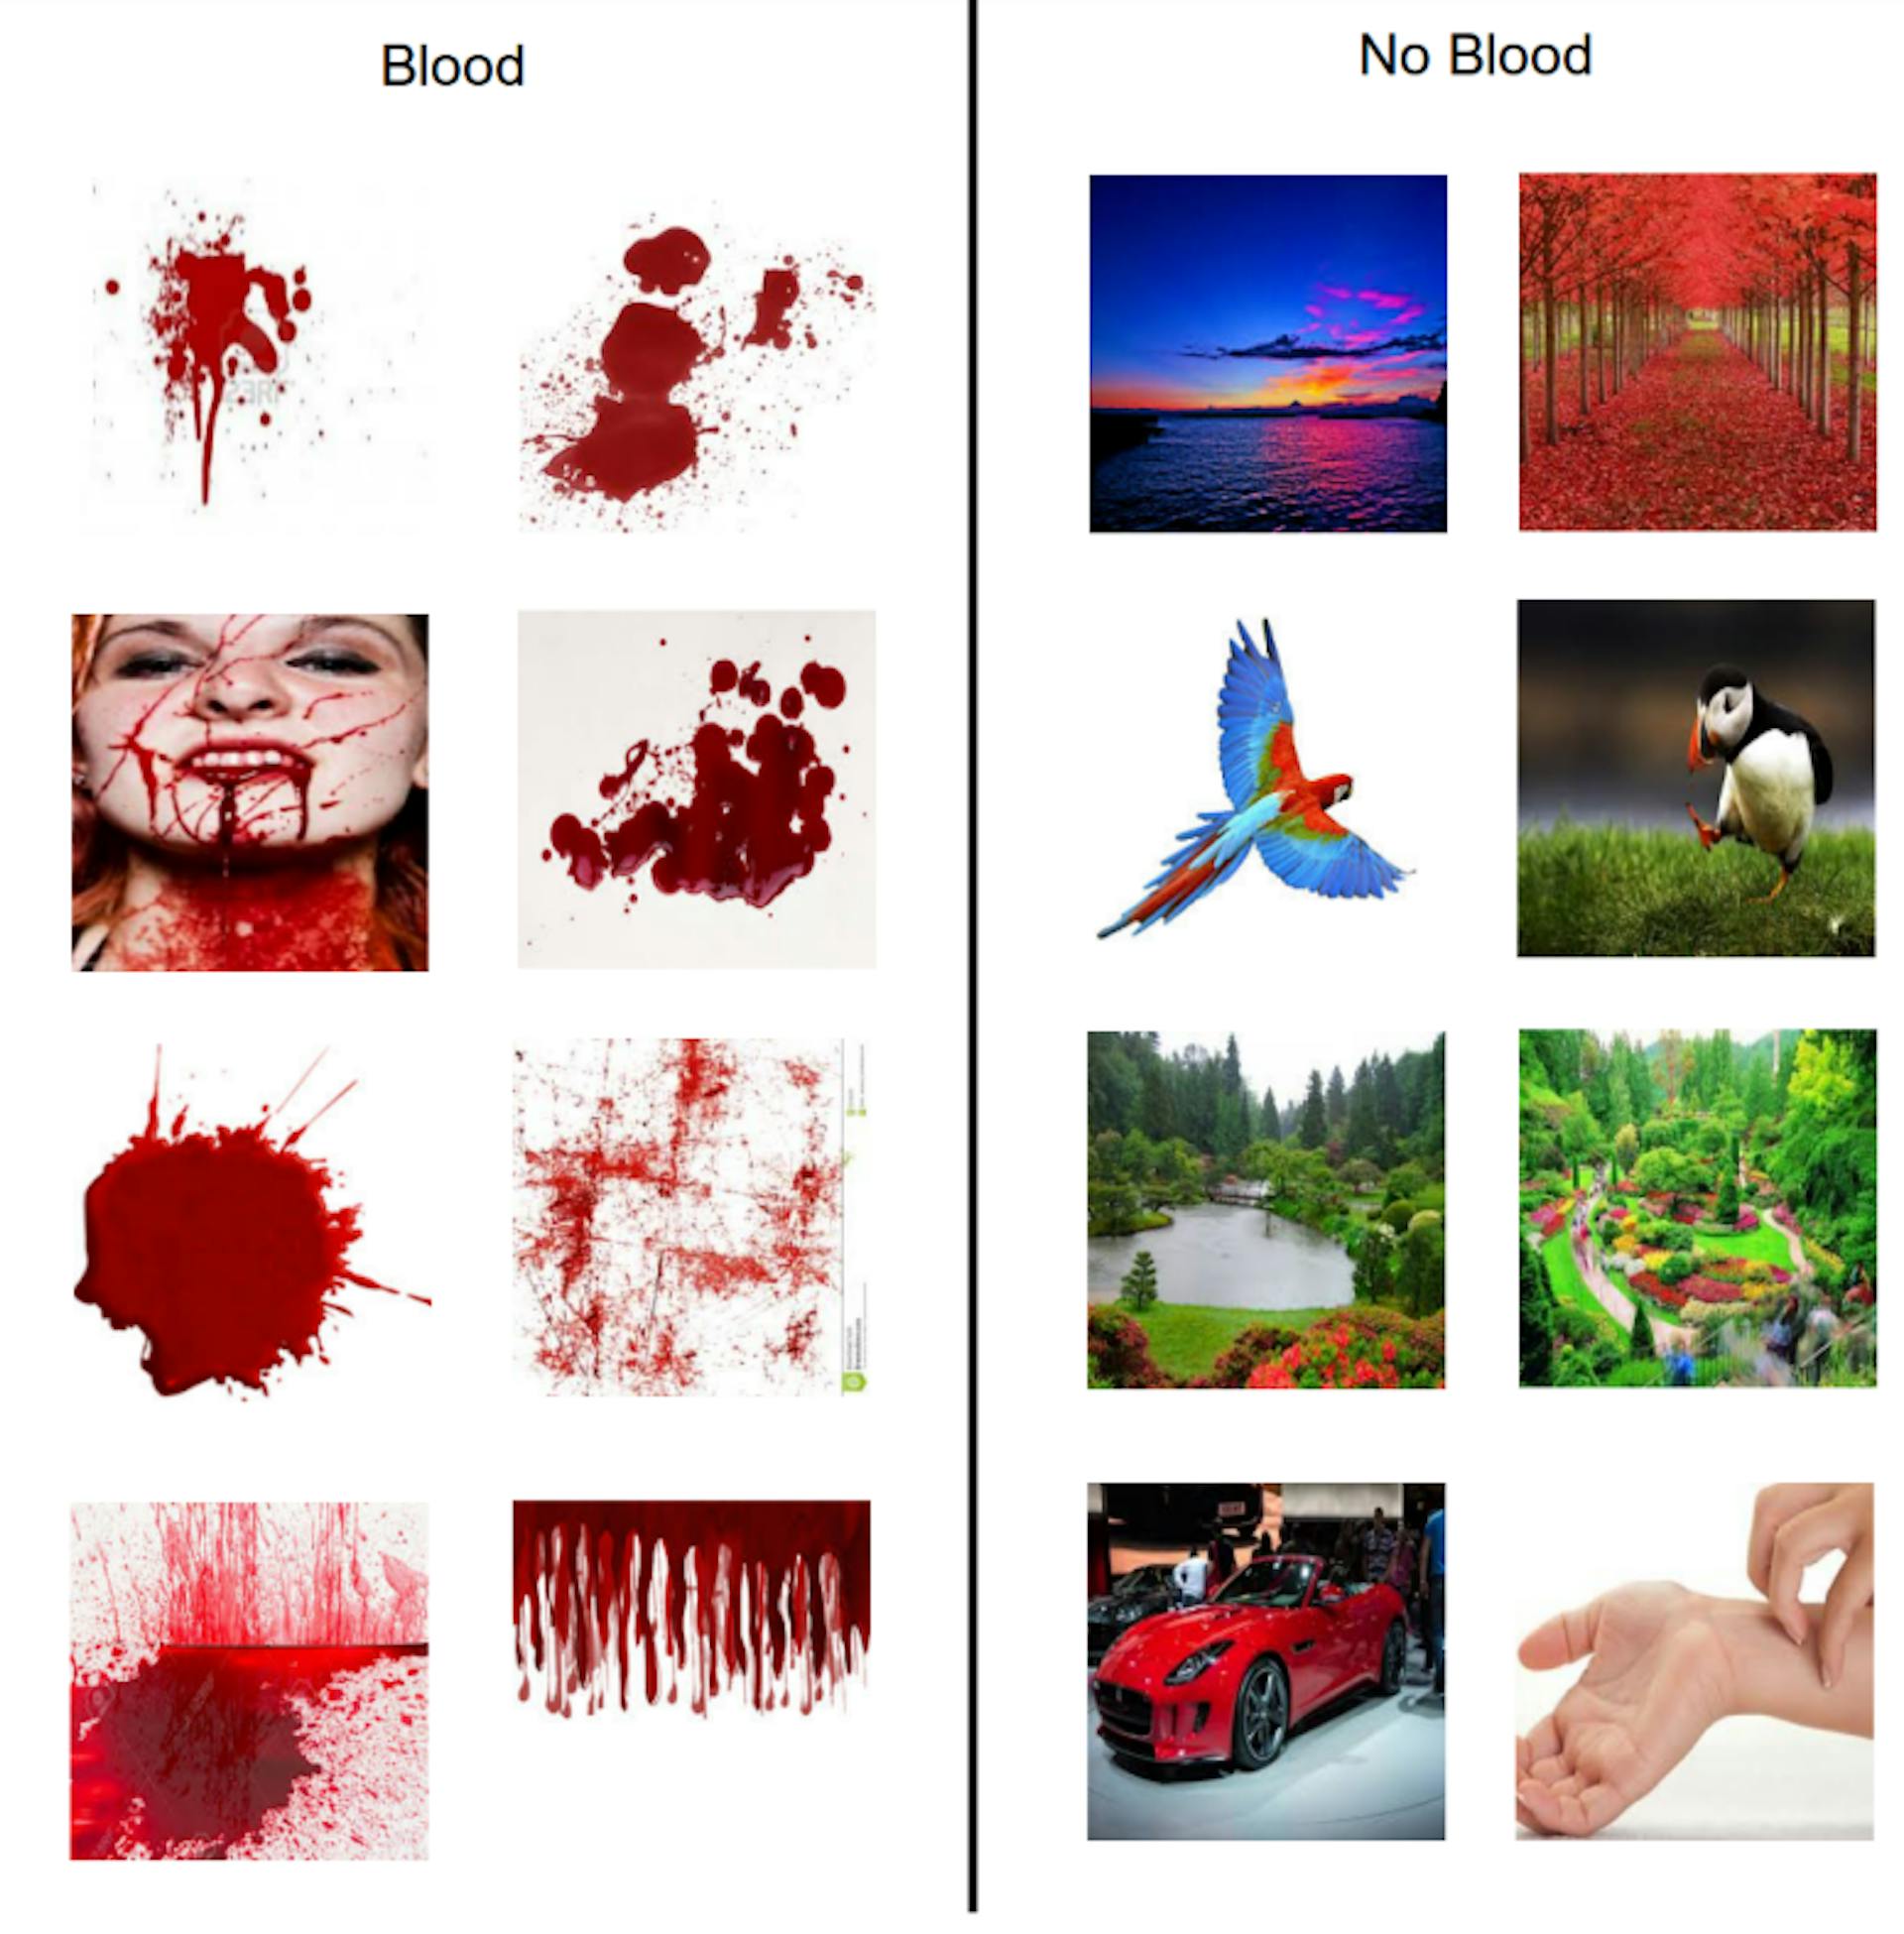 Figure 3.3: Figure showing sample images downloaded from Google to generate blood and non-blood models.